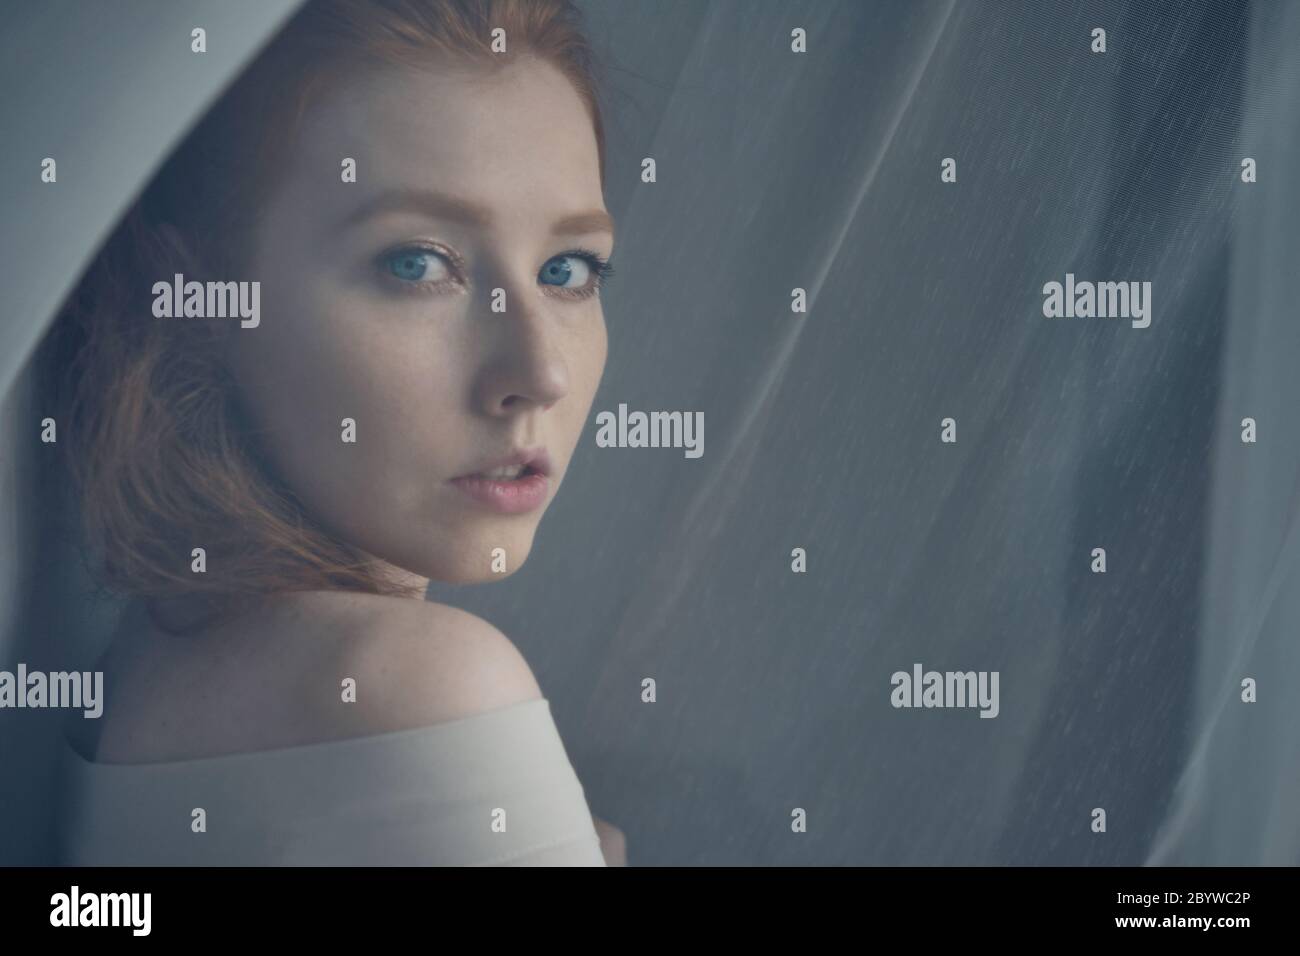 A red-haired girl with blue eyes stands in the midst of a translucent curtain and looks over shoulder, a view through the curtain. Stock Photo